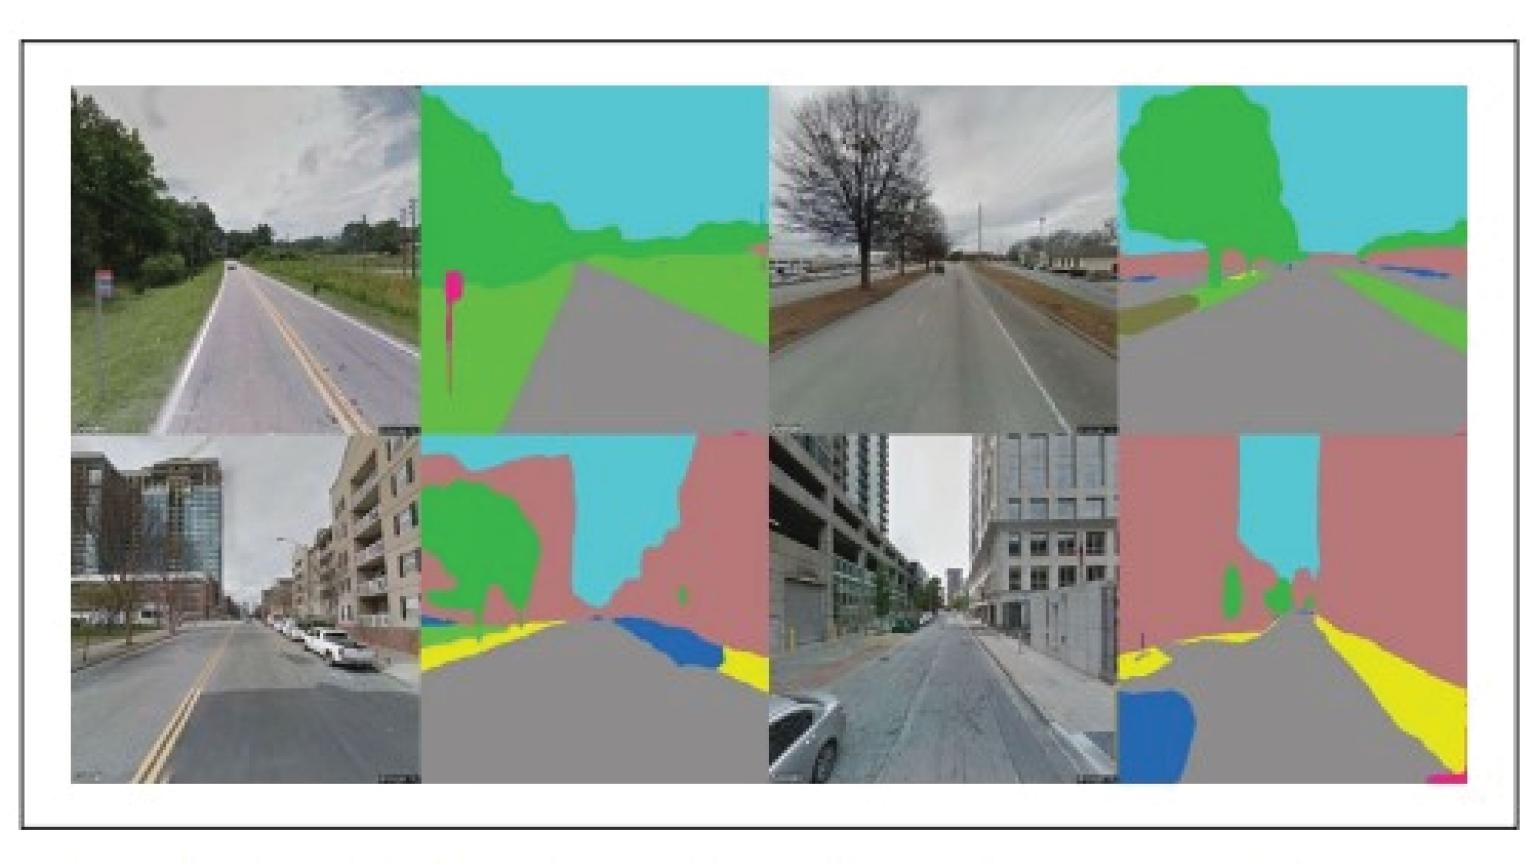 Image of computer vision analysis in a set of image streets